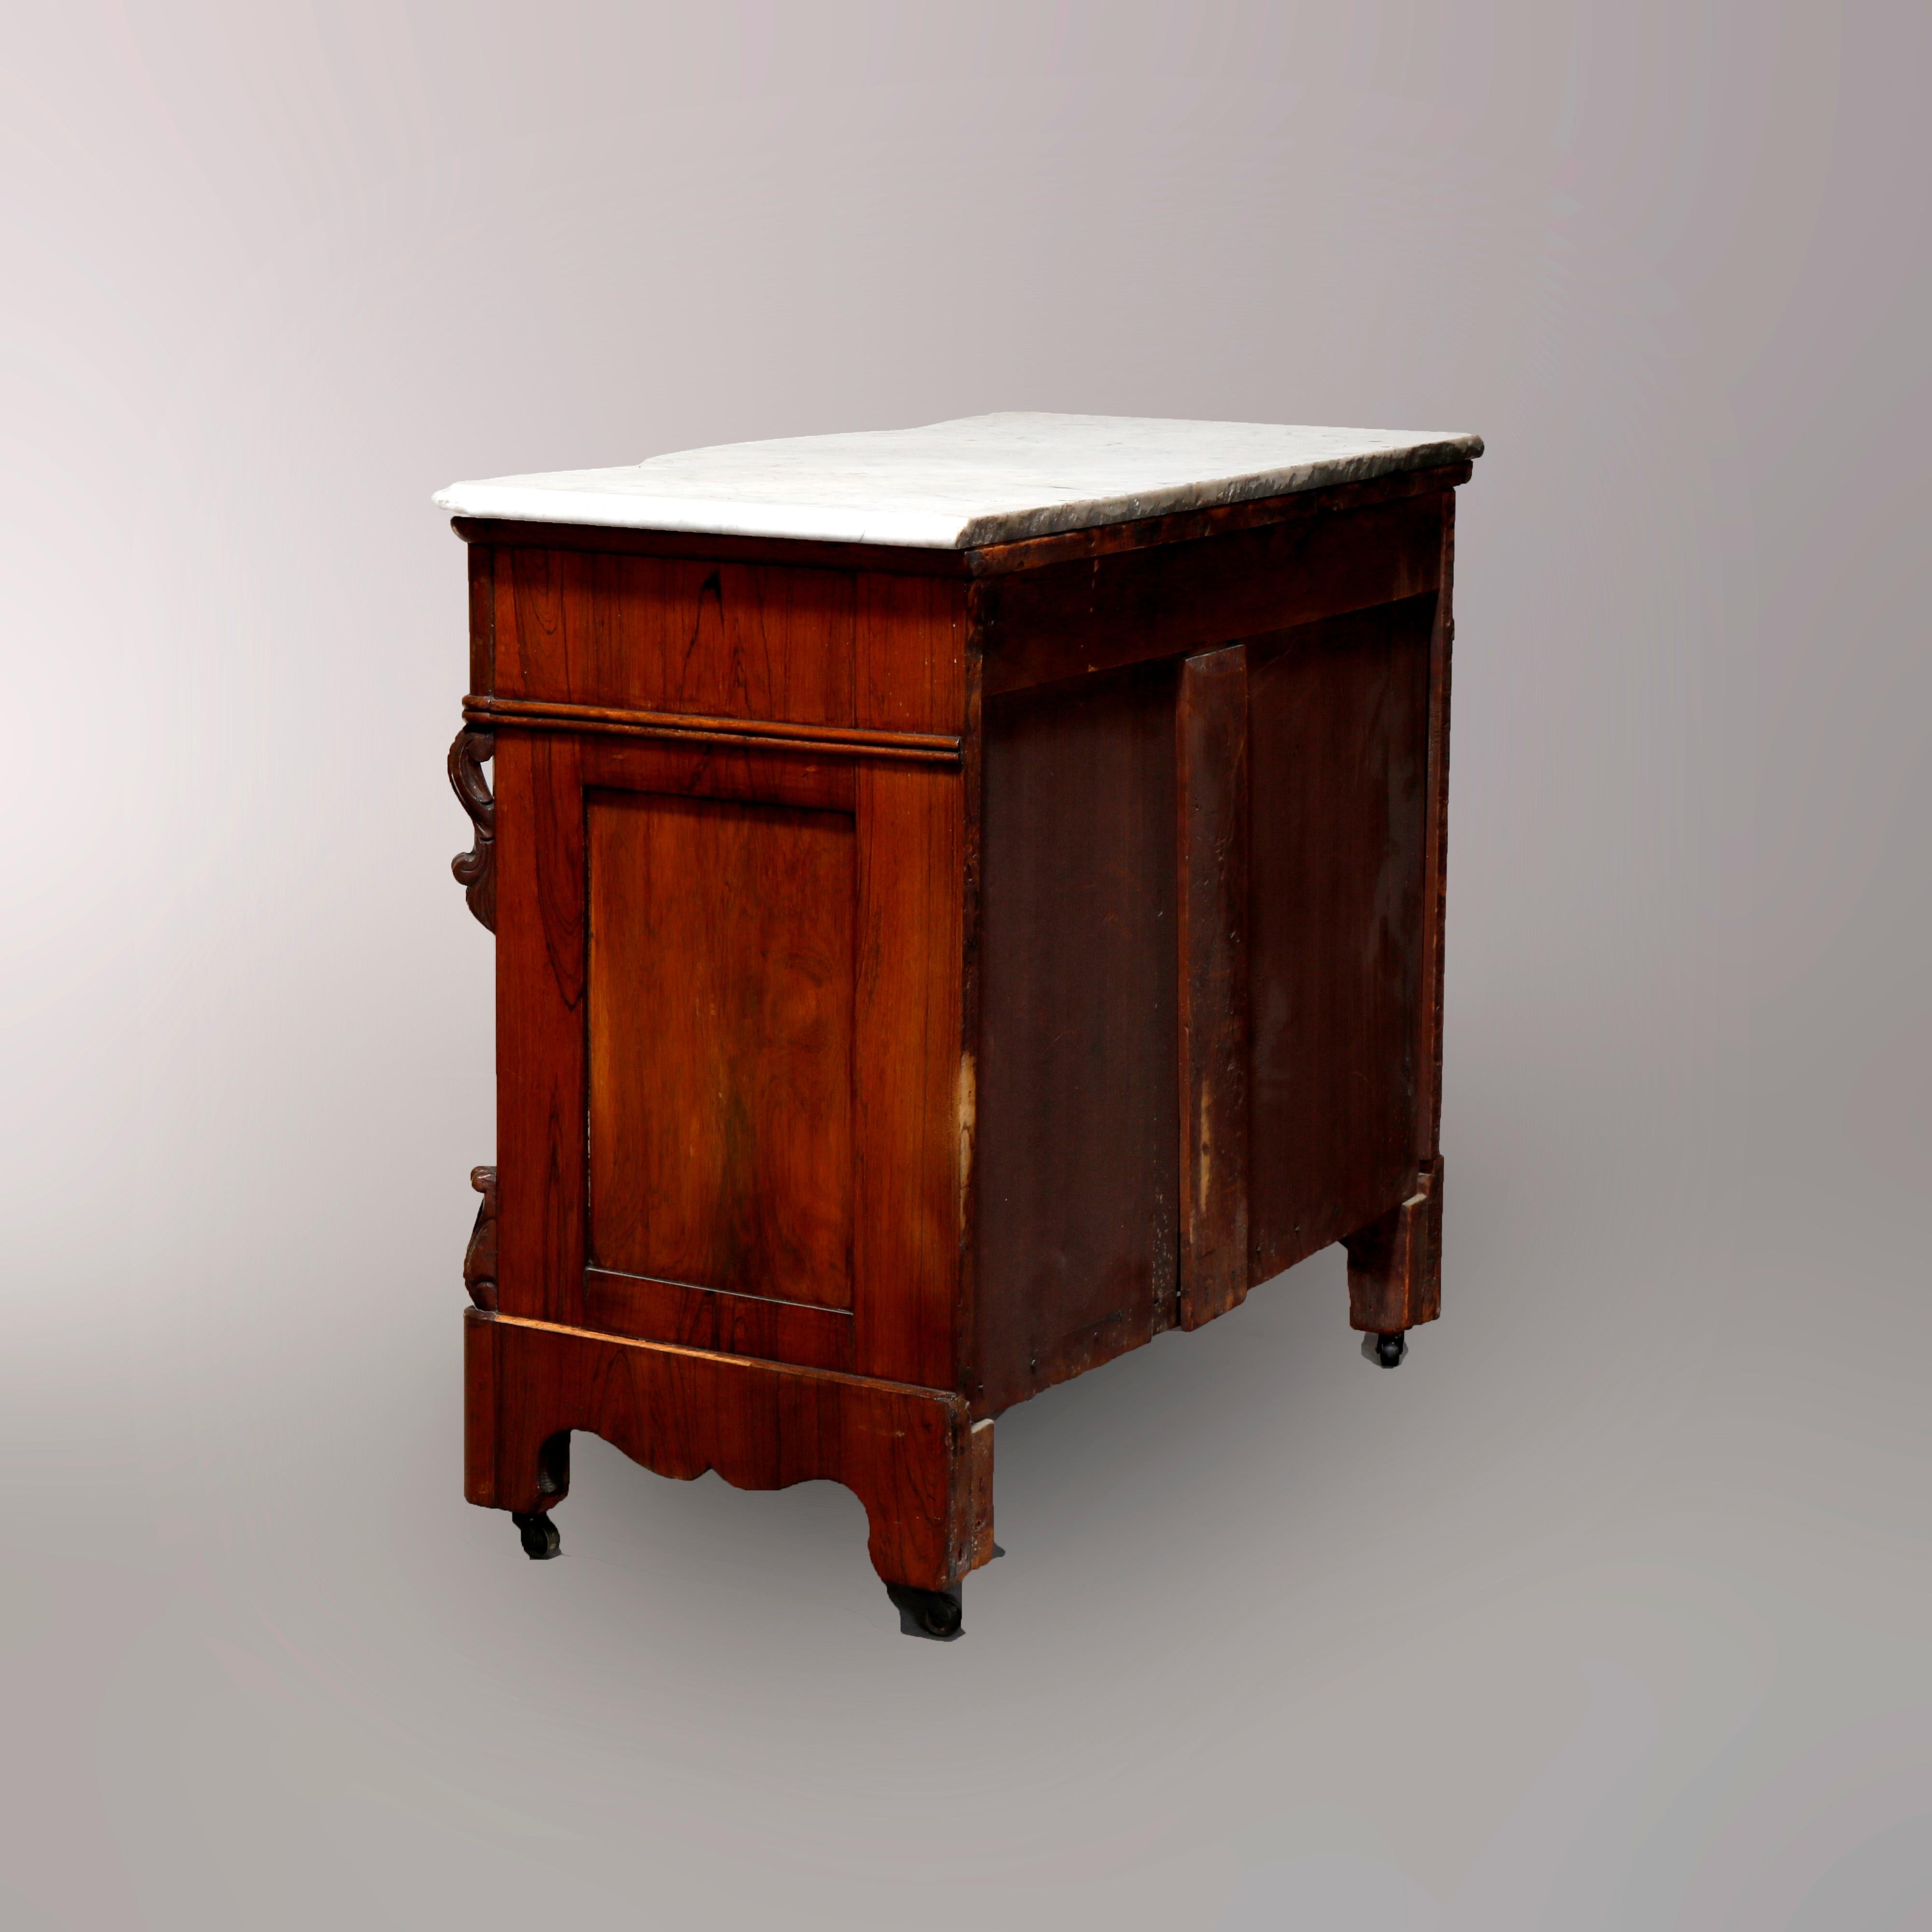 Carved Antique Victorian Rococo Rosewood and Marble Top Commode, circa 1860